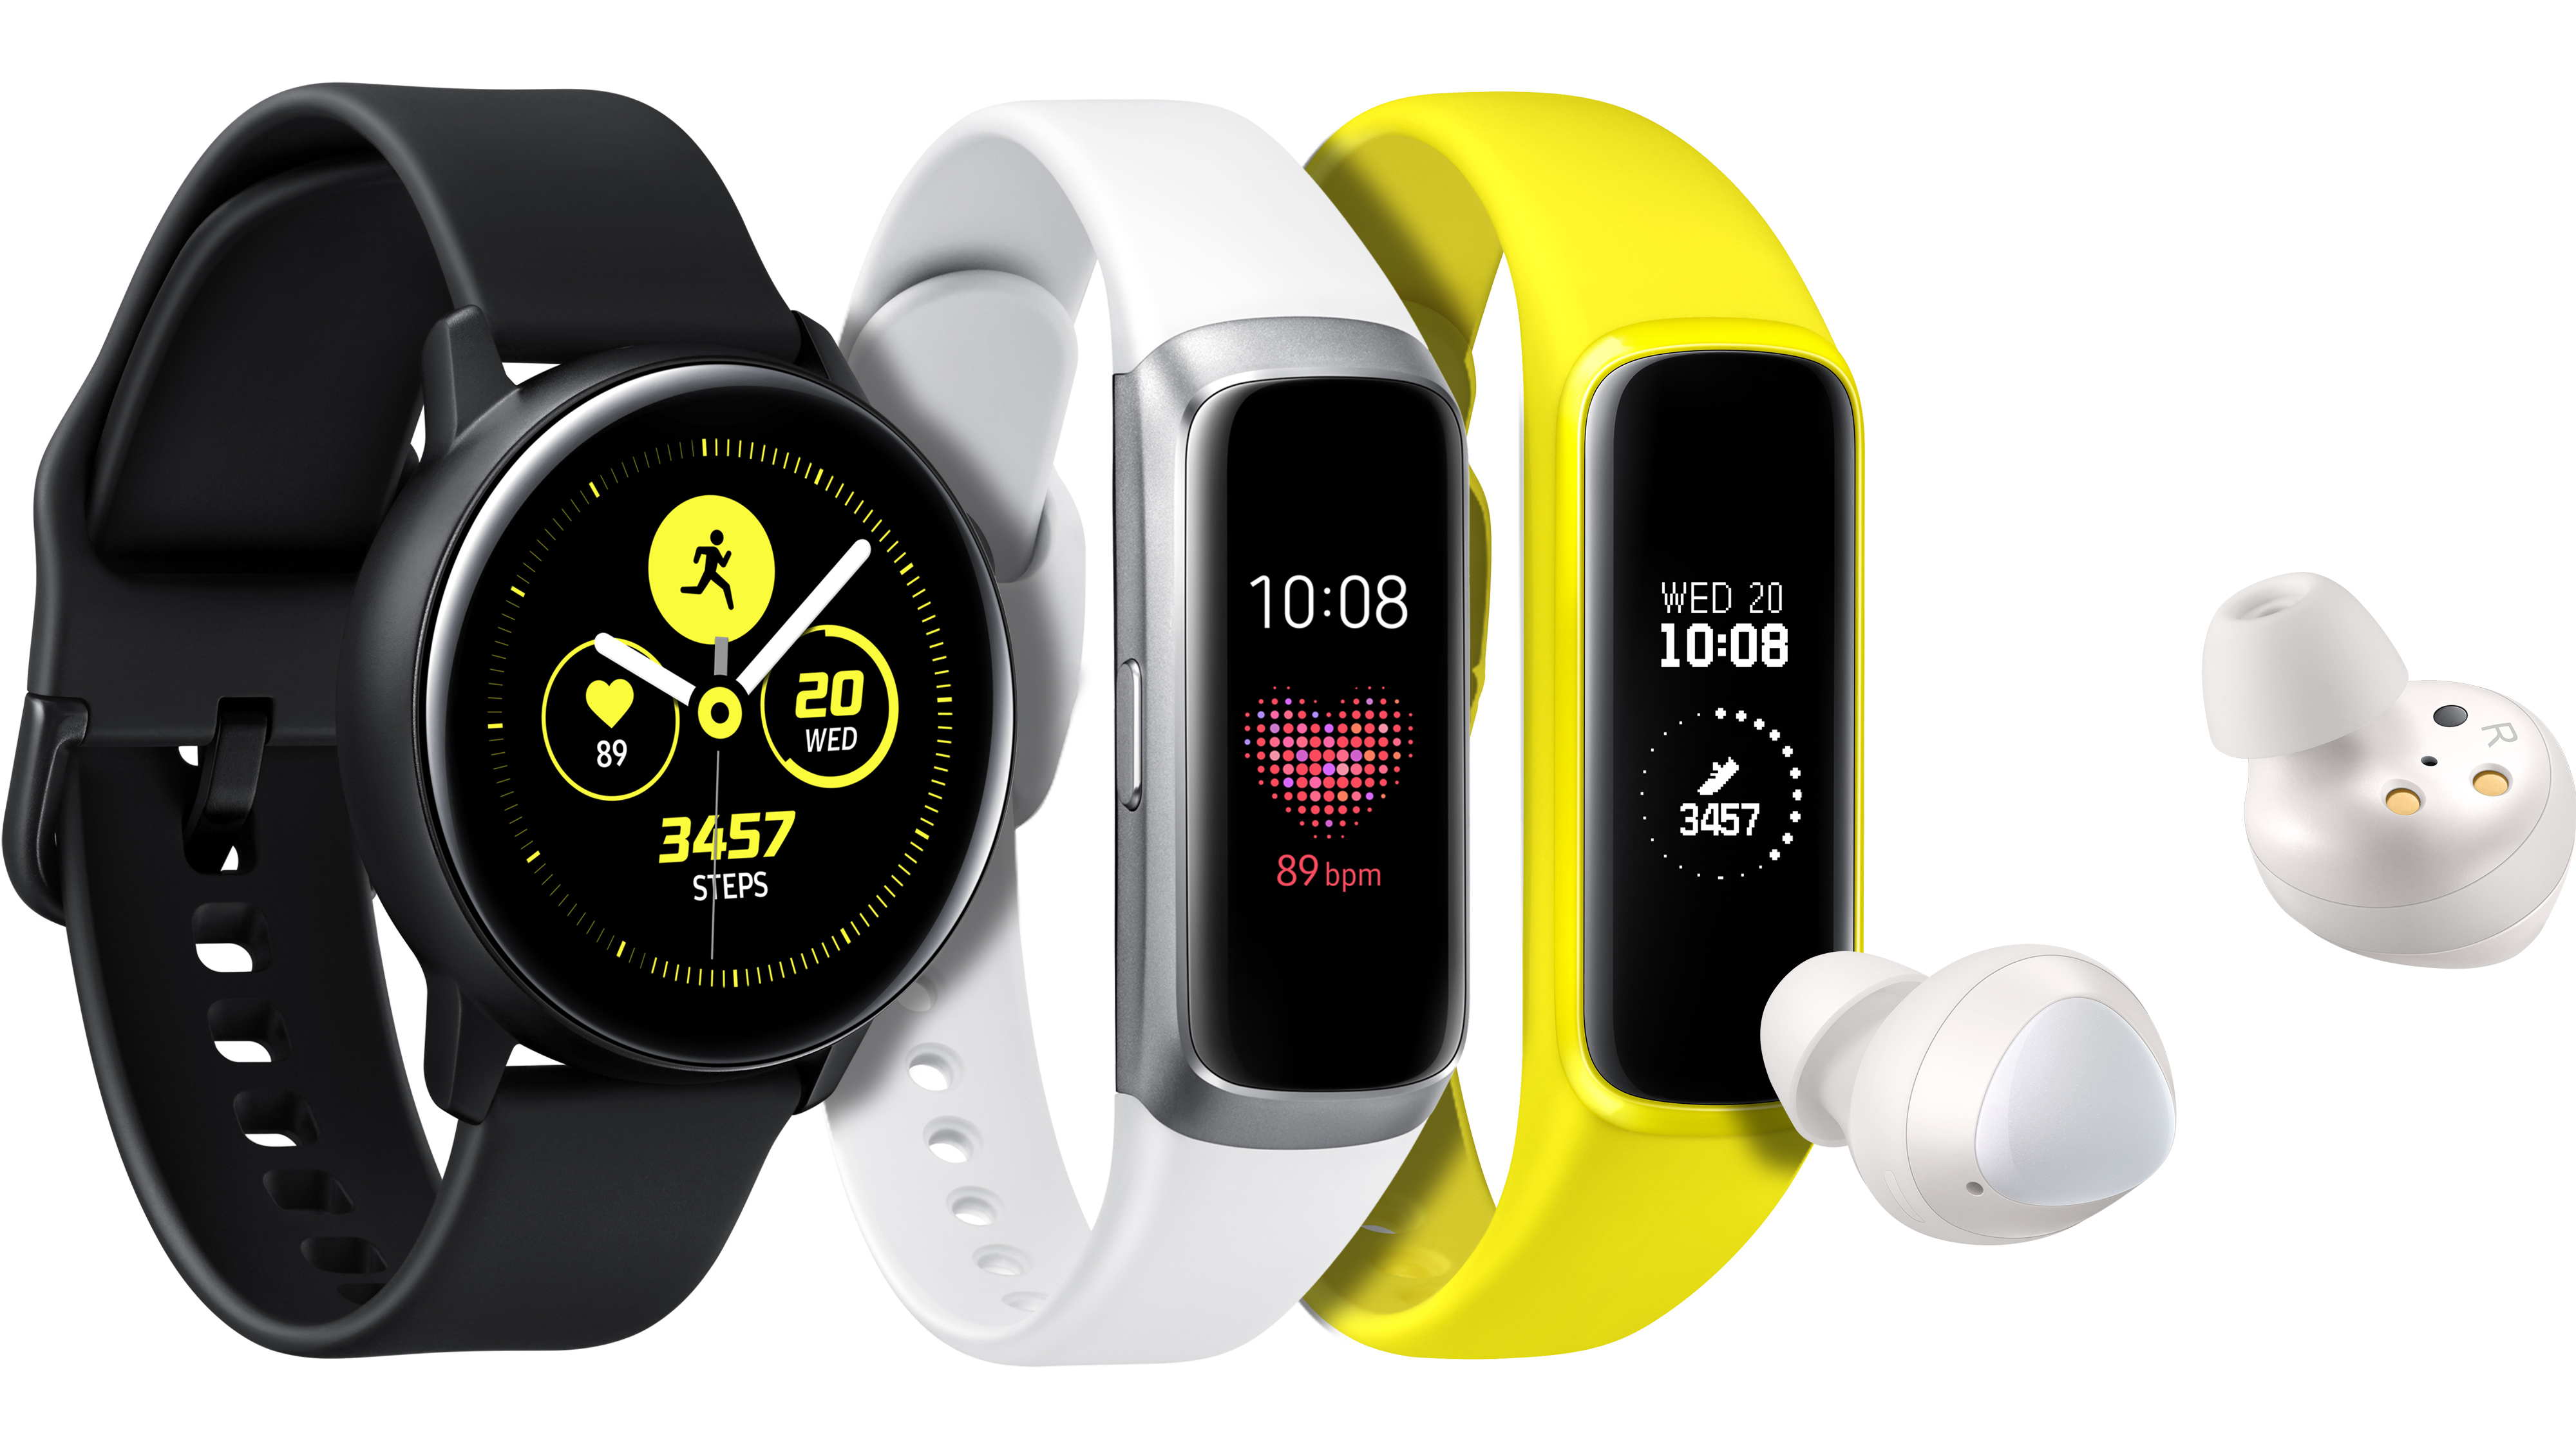 While Galaxy Watch Active functions more like Apple Watch, Galaxy Fit looks more like a straight-up fitness tracker.